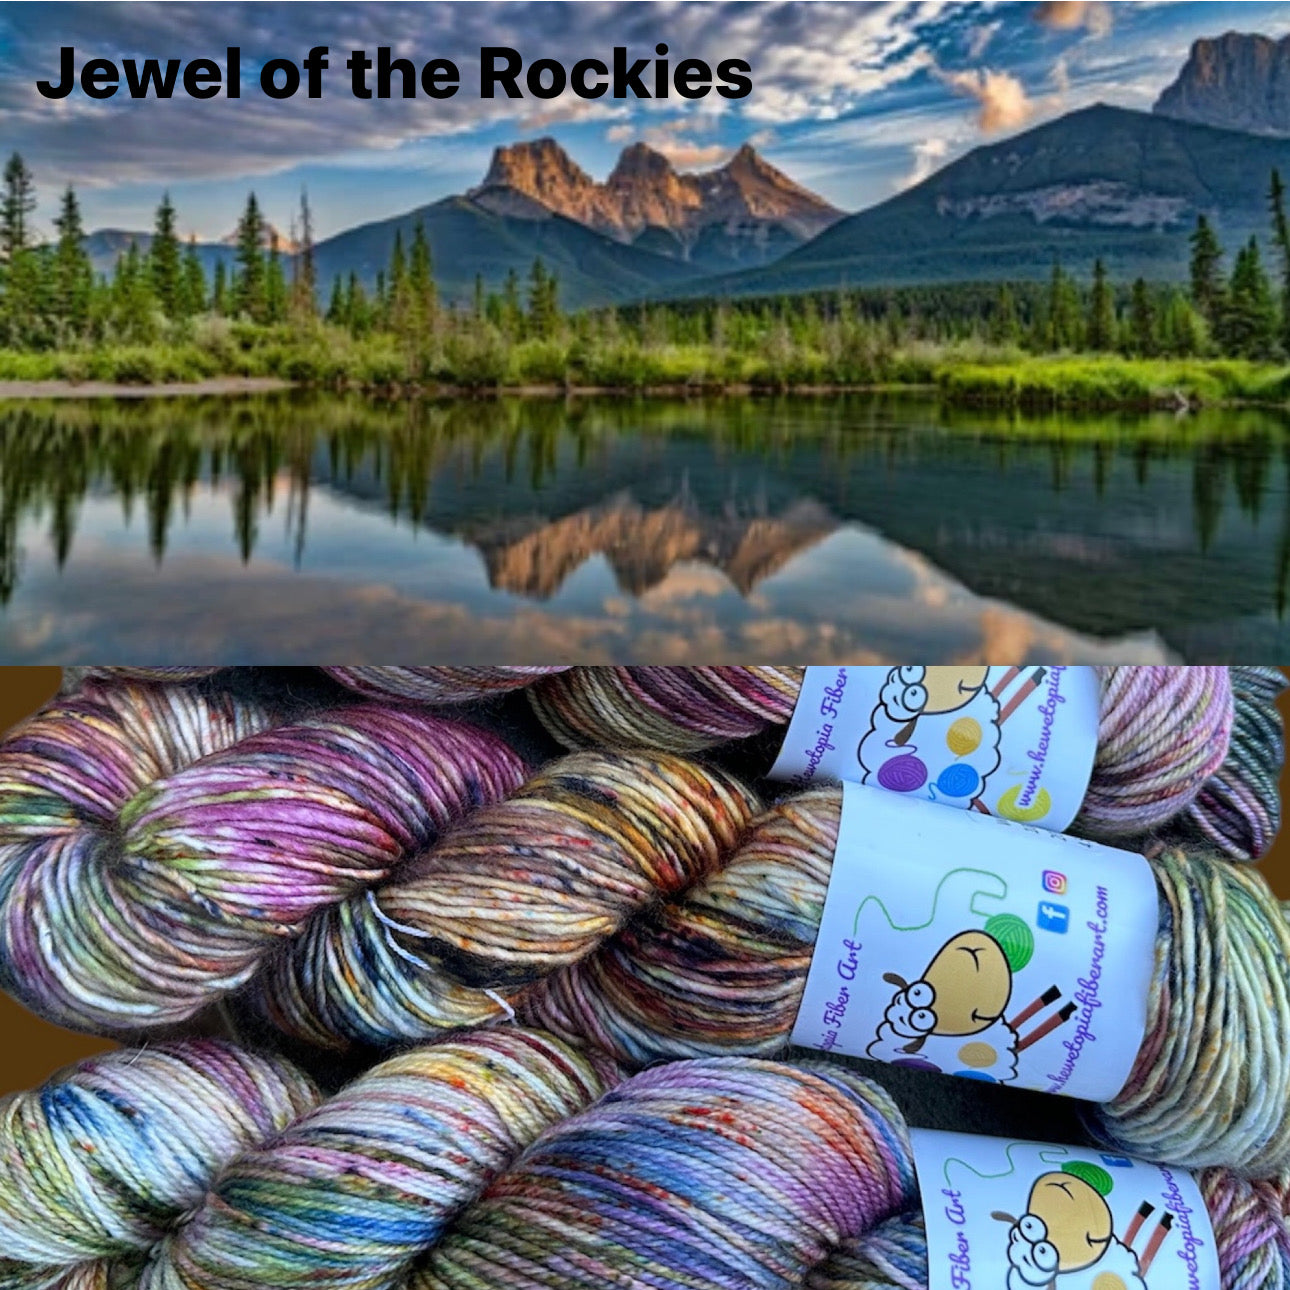 The Jewel of the Rockies